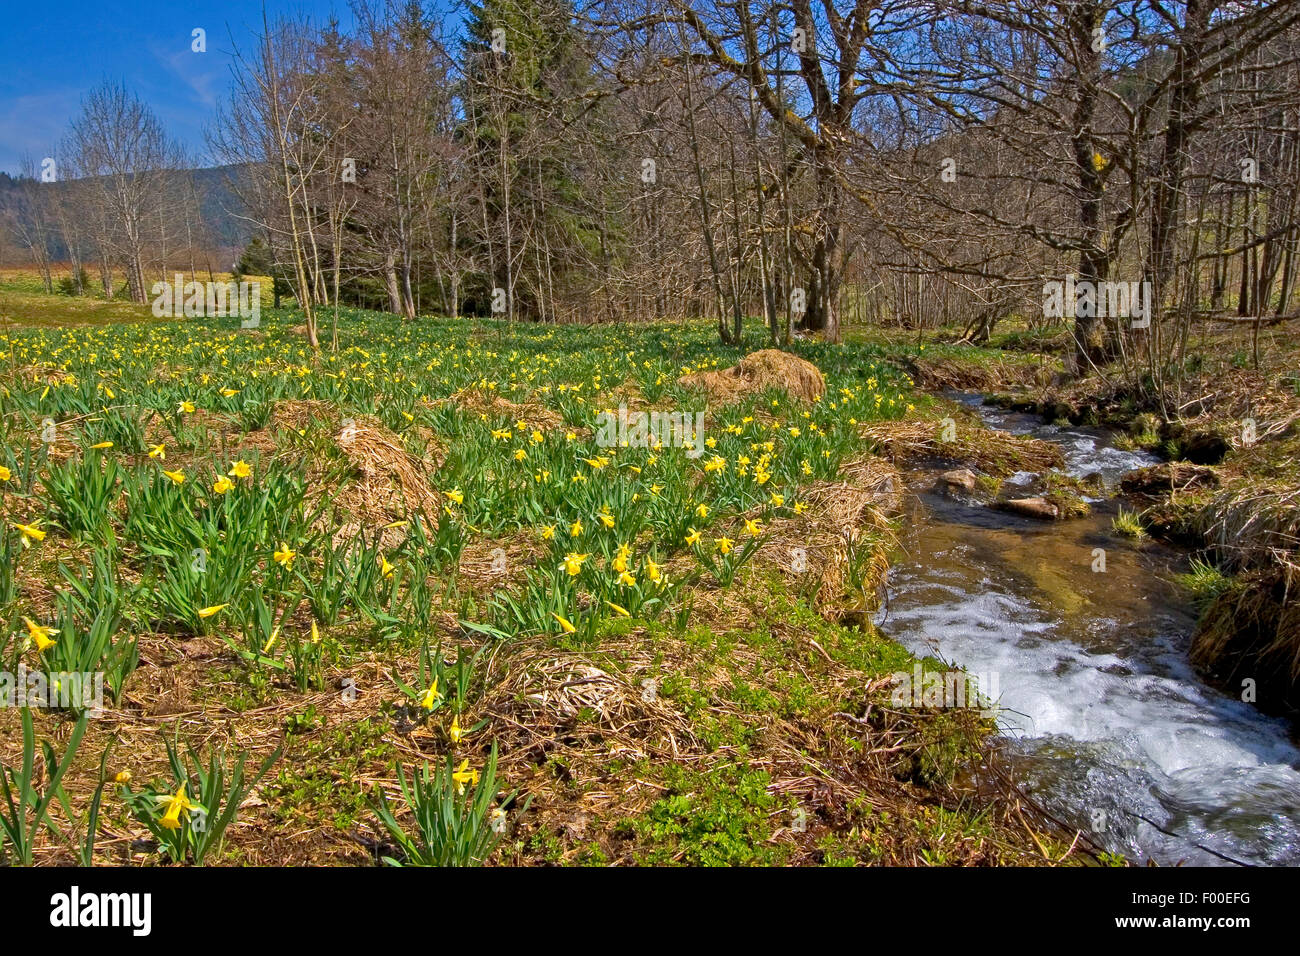 common daffodil (Narcissus pseudonarcissus), blooming in a meadow at a creek, Germany Stock Photo